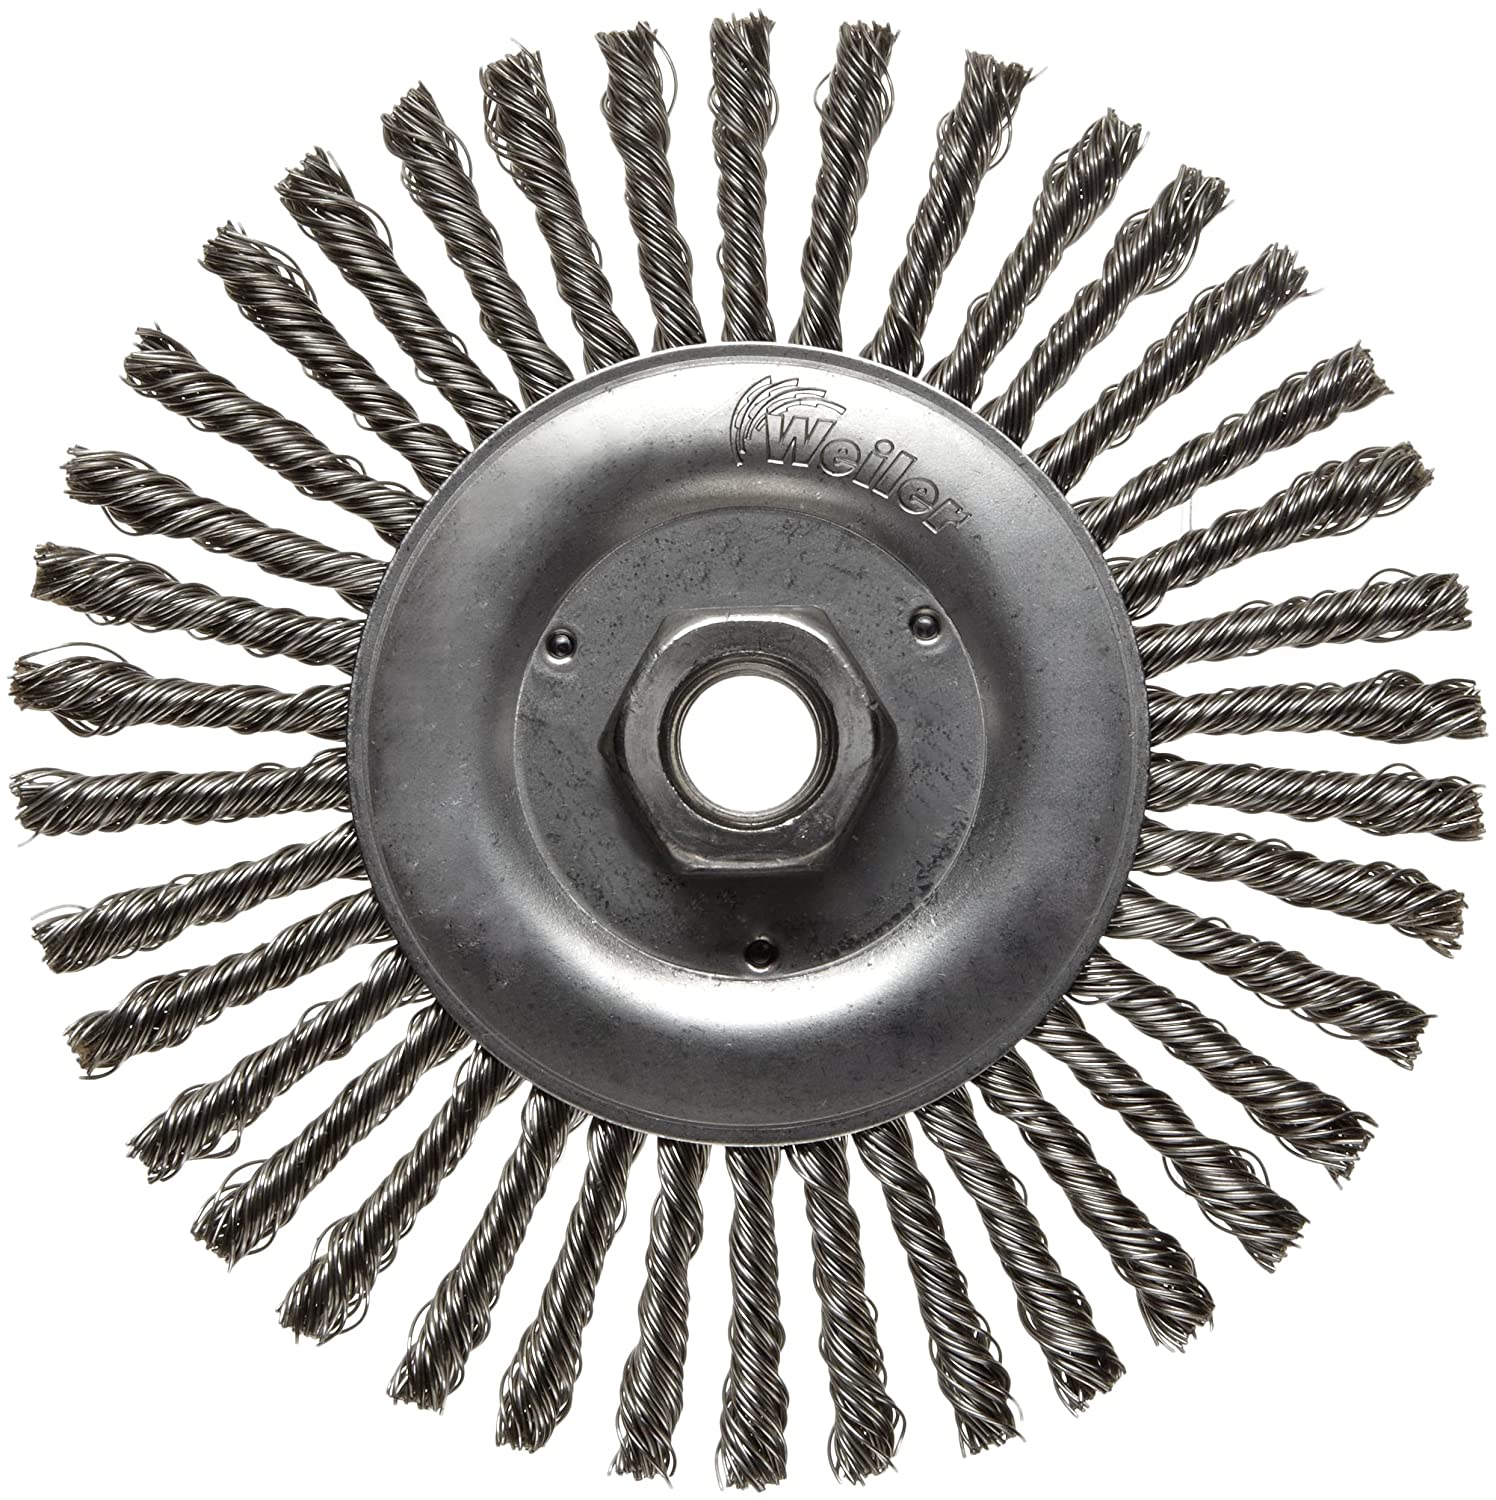 STB-620 6" SS 5/8-11 - Roughneck Jr. 6" Root Pass Weld Cleaning Brush, .020" Stainless Steel Wire Fill, 5/8"-11 UNC Nut